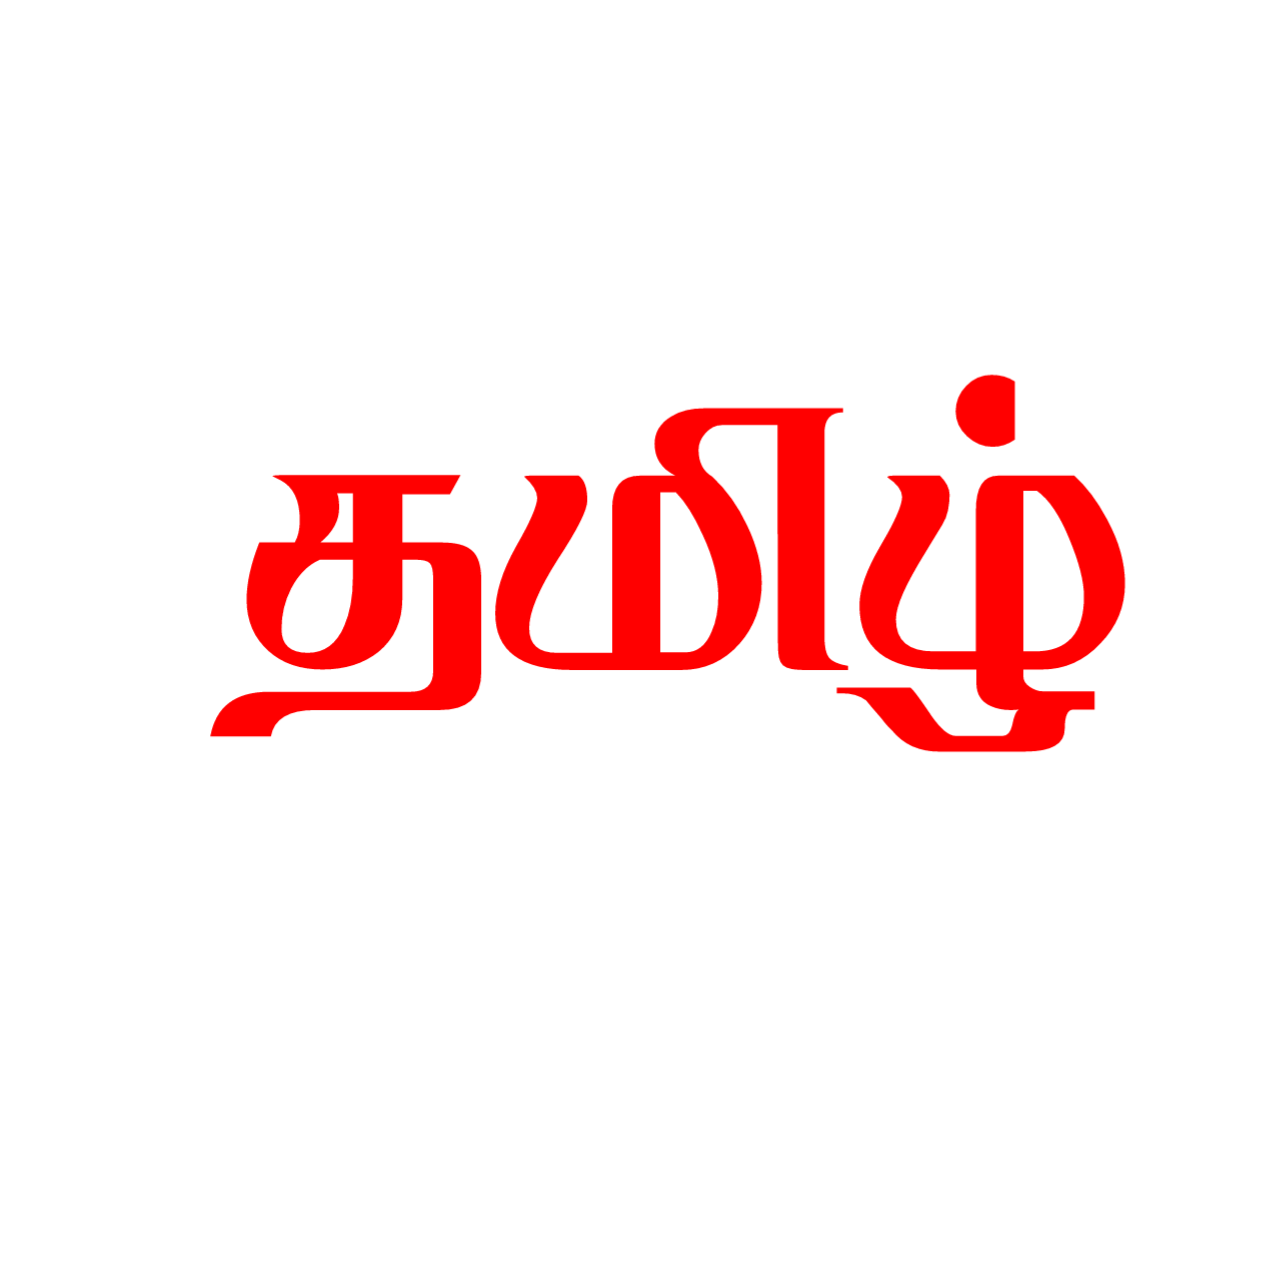 Download Tamil font ttf collection free download